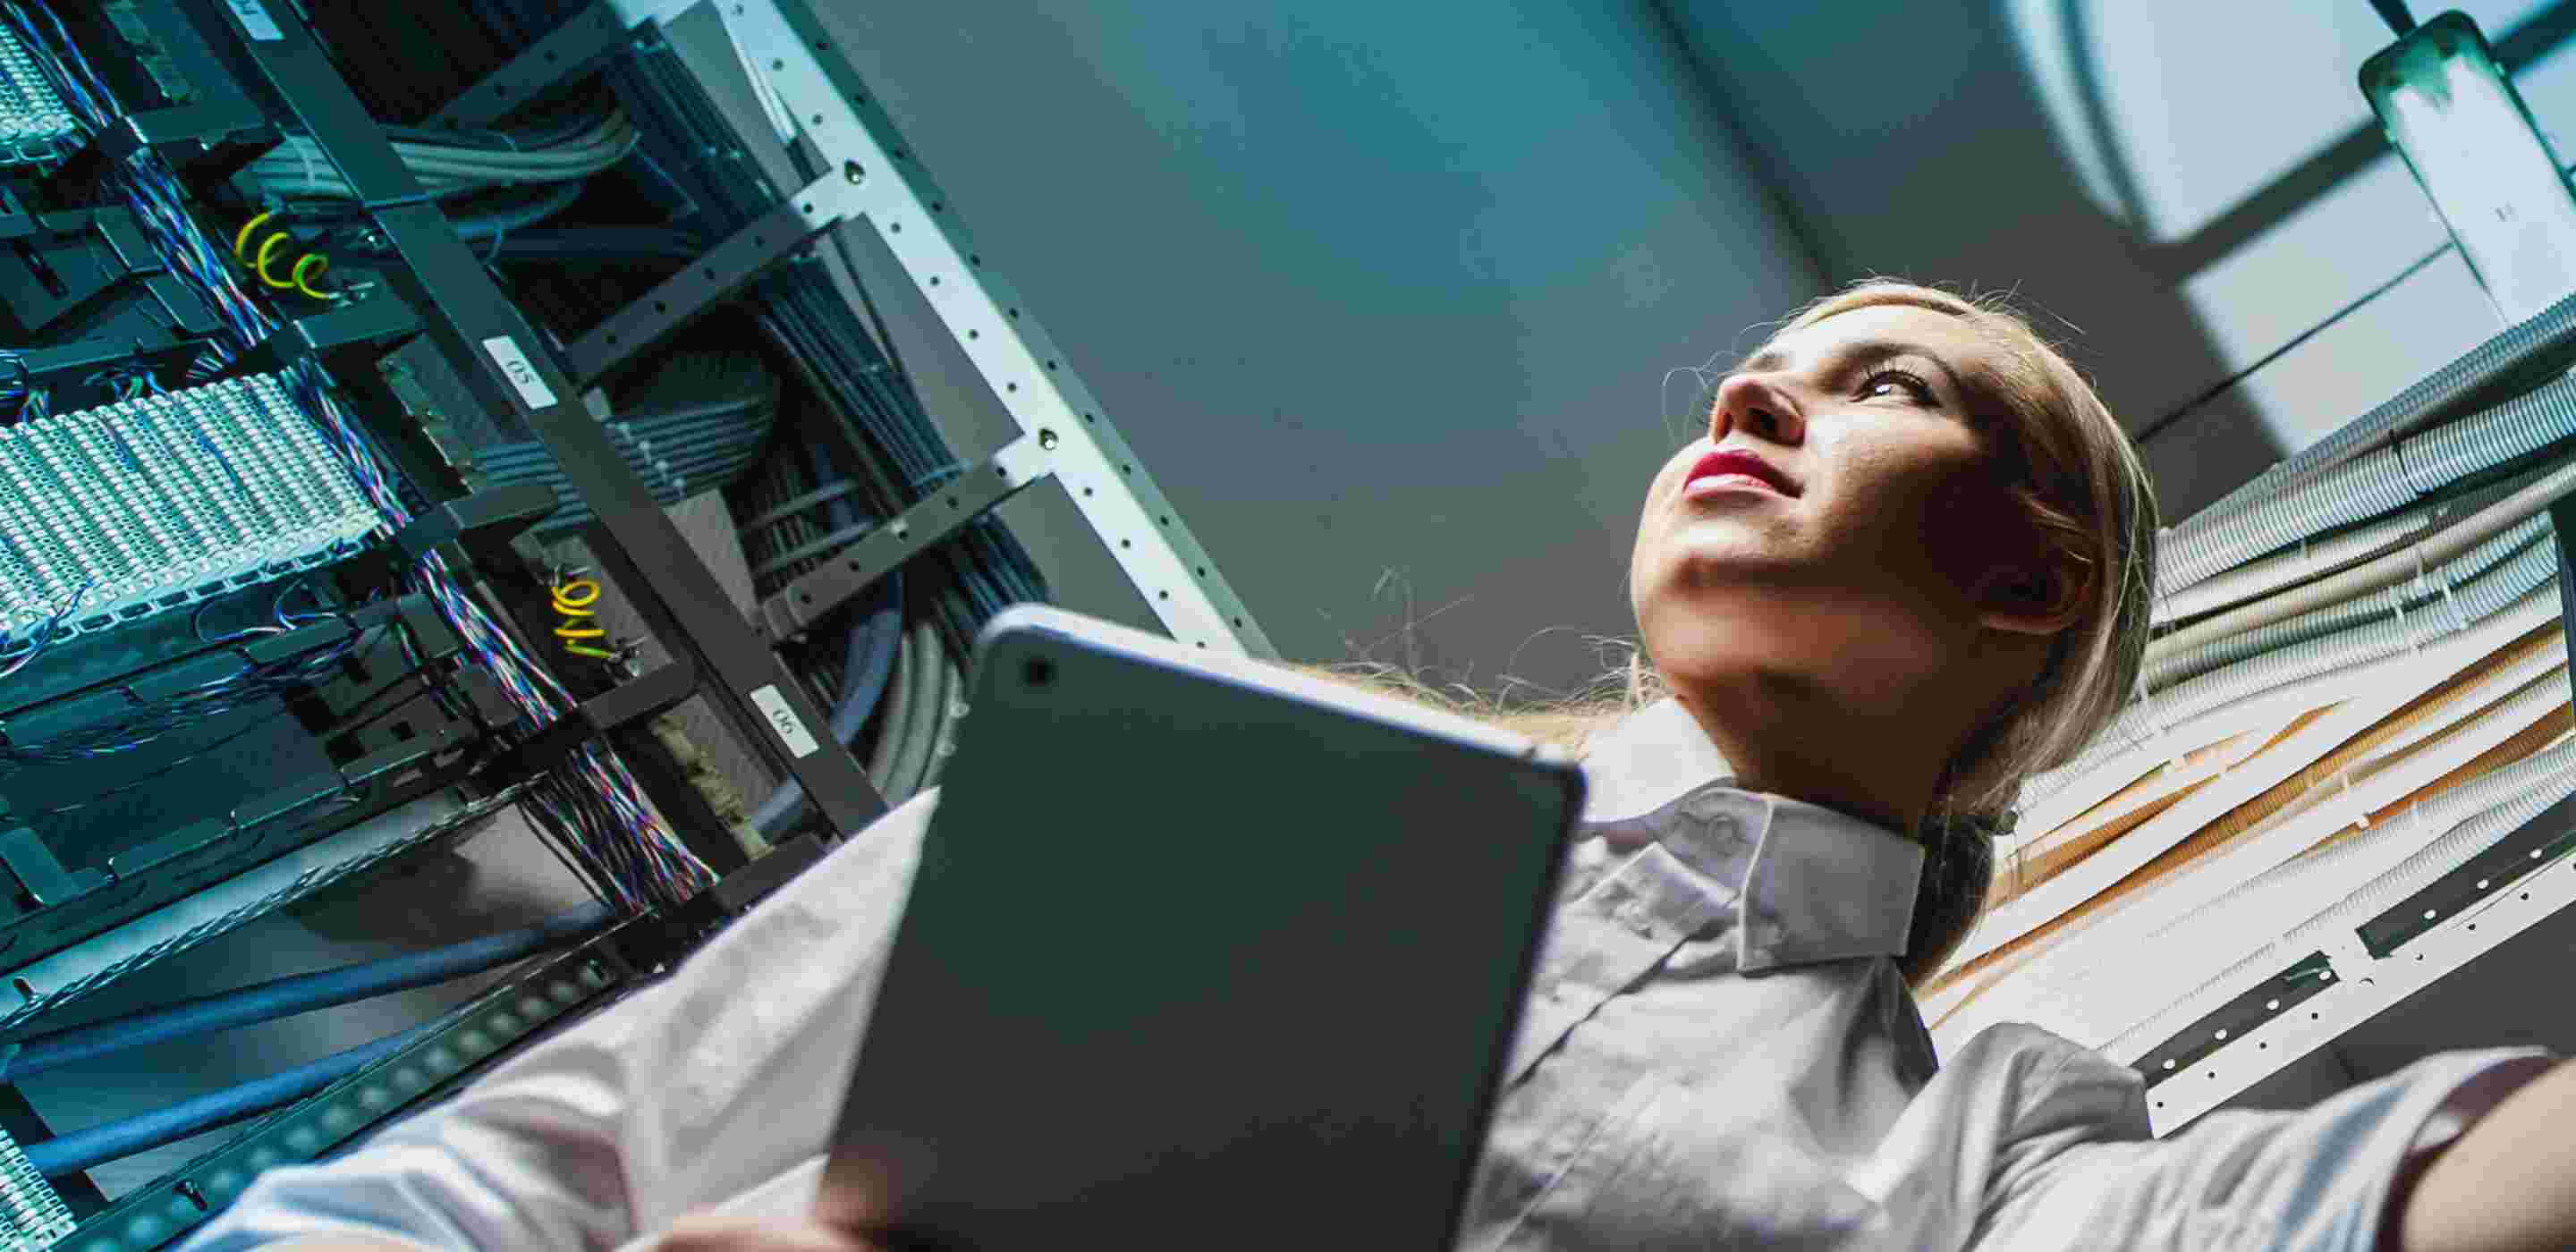 A woman holding a tablet in a server room